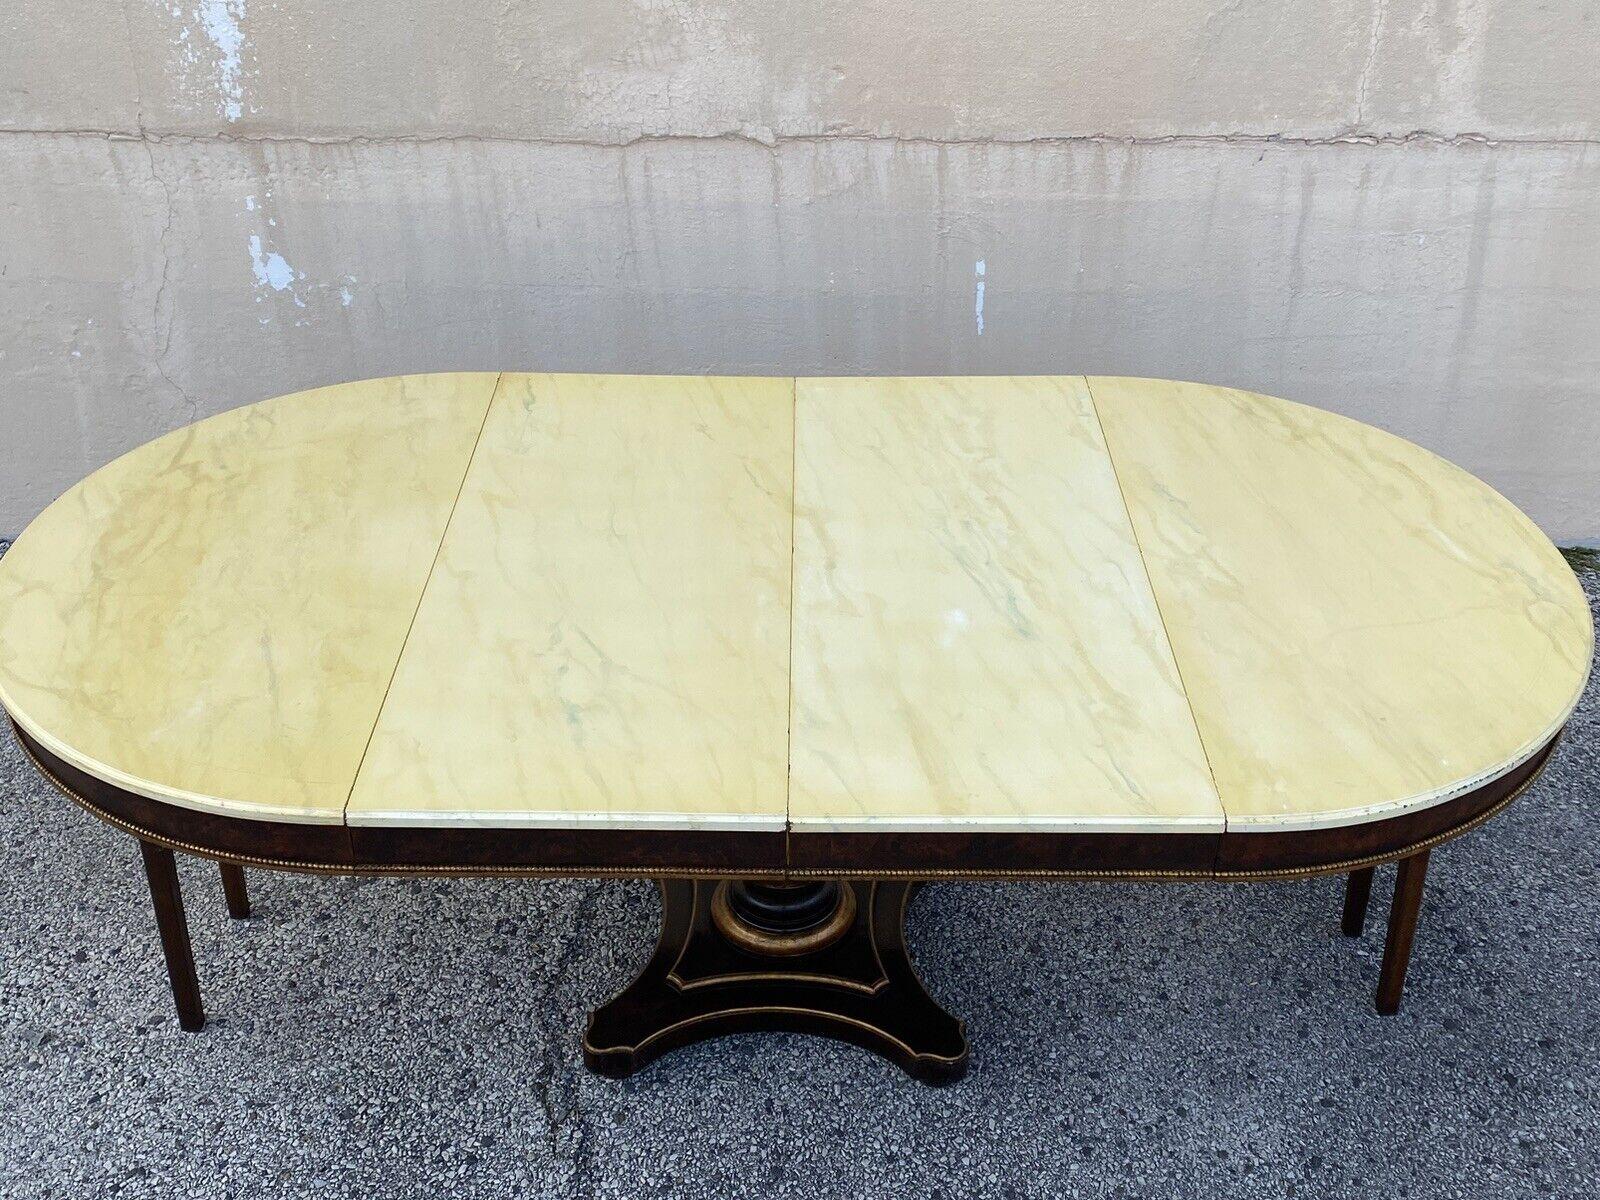 Vintage Italian Regency Style Pedestal Base Round Dining Table Cream Lacquer Top For Sale 4